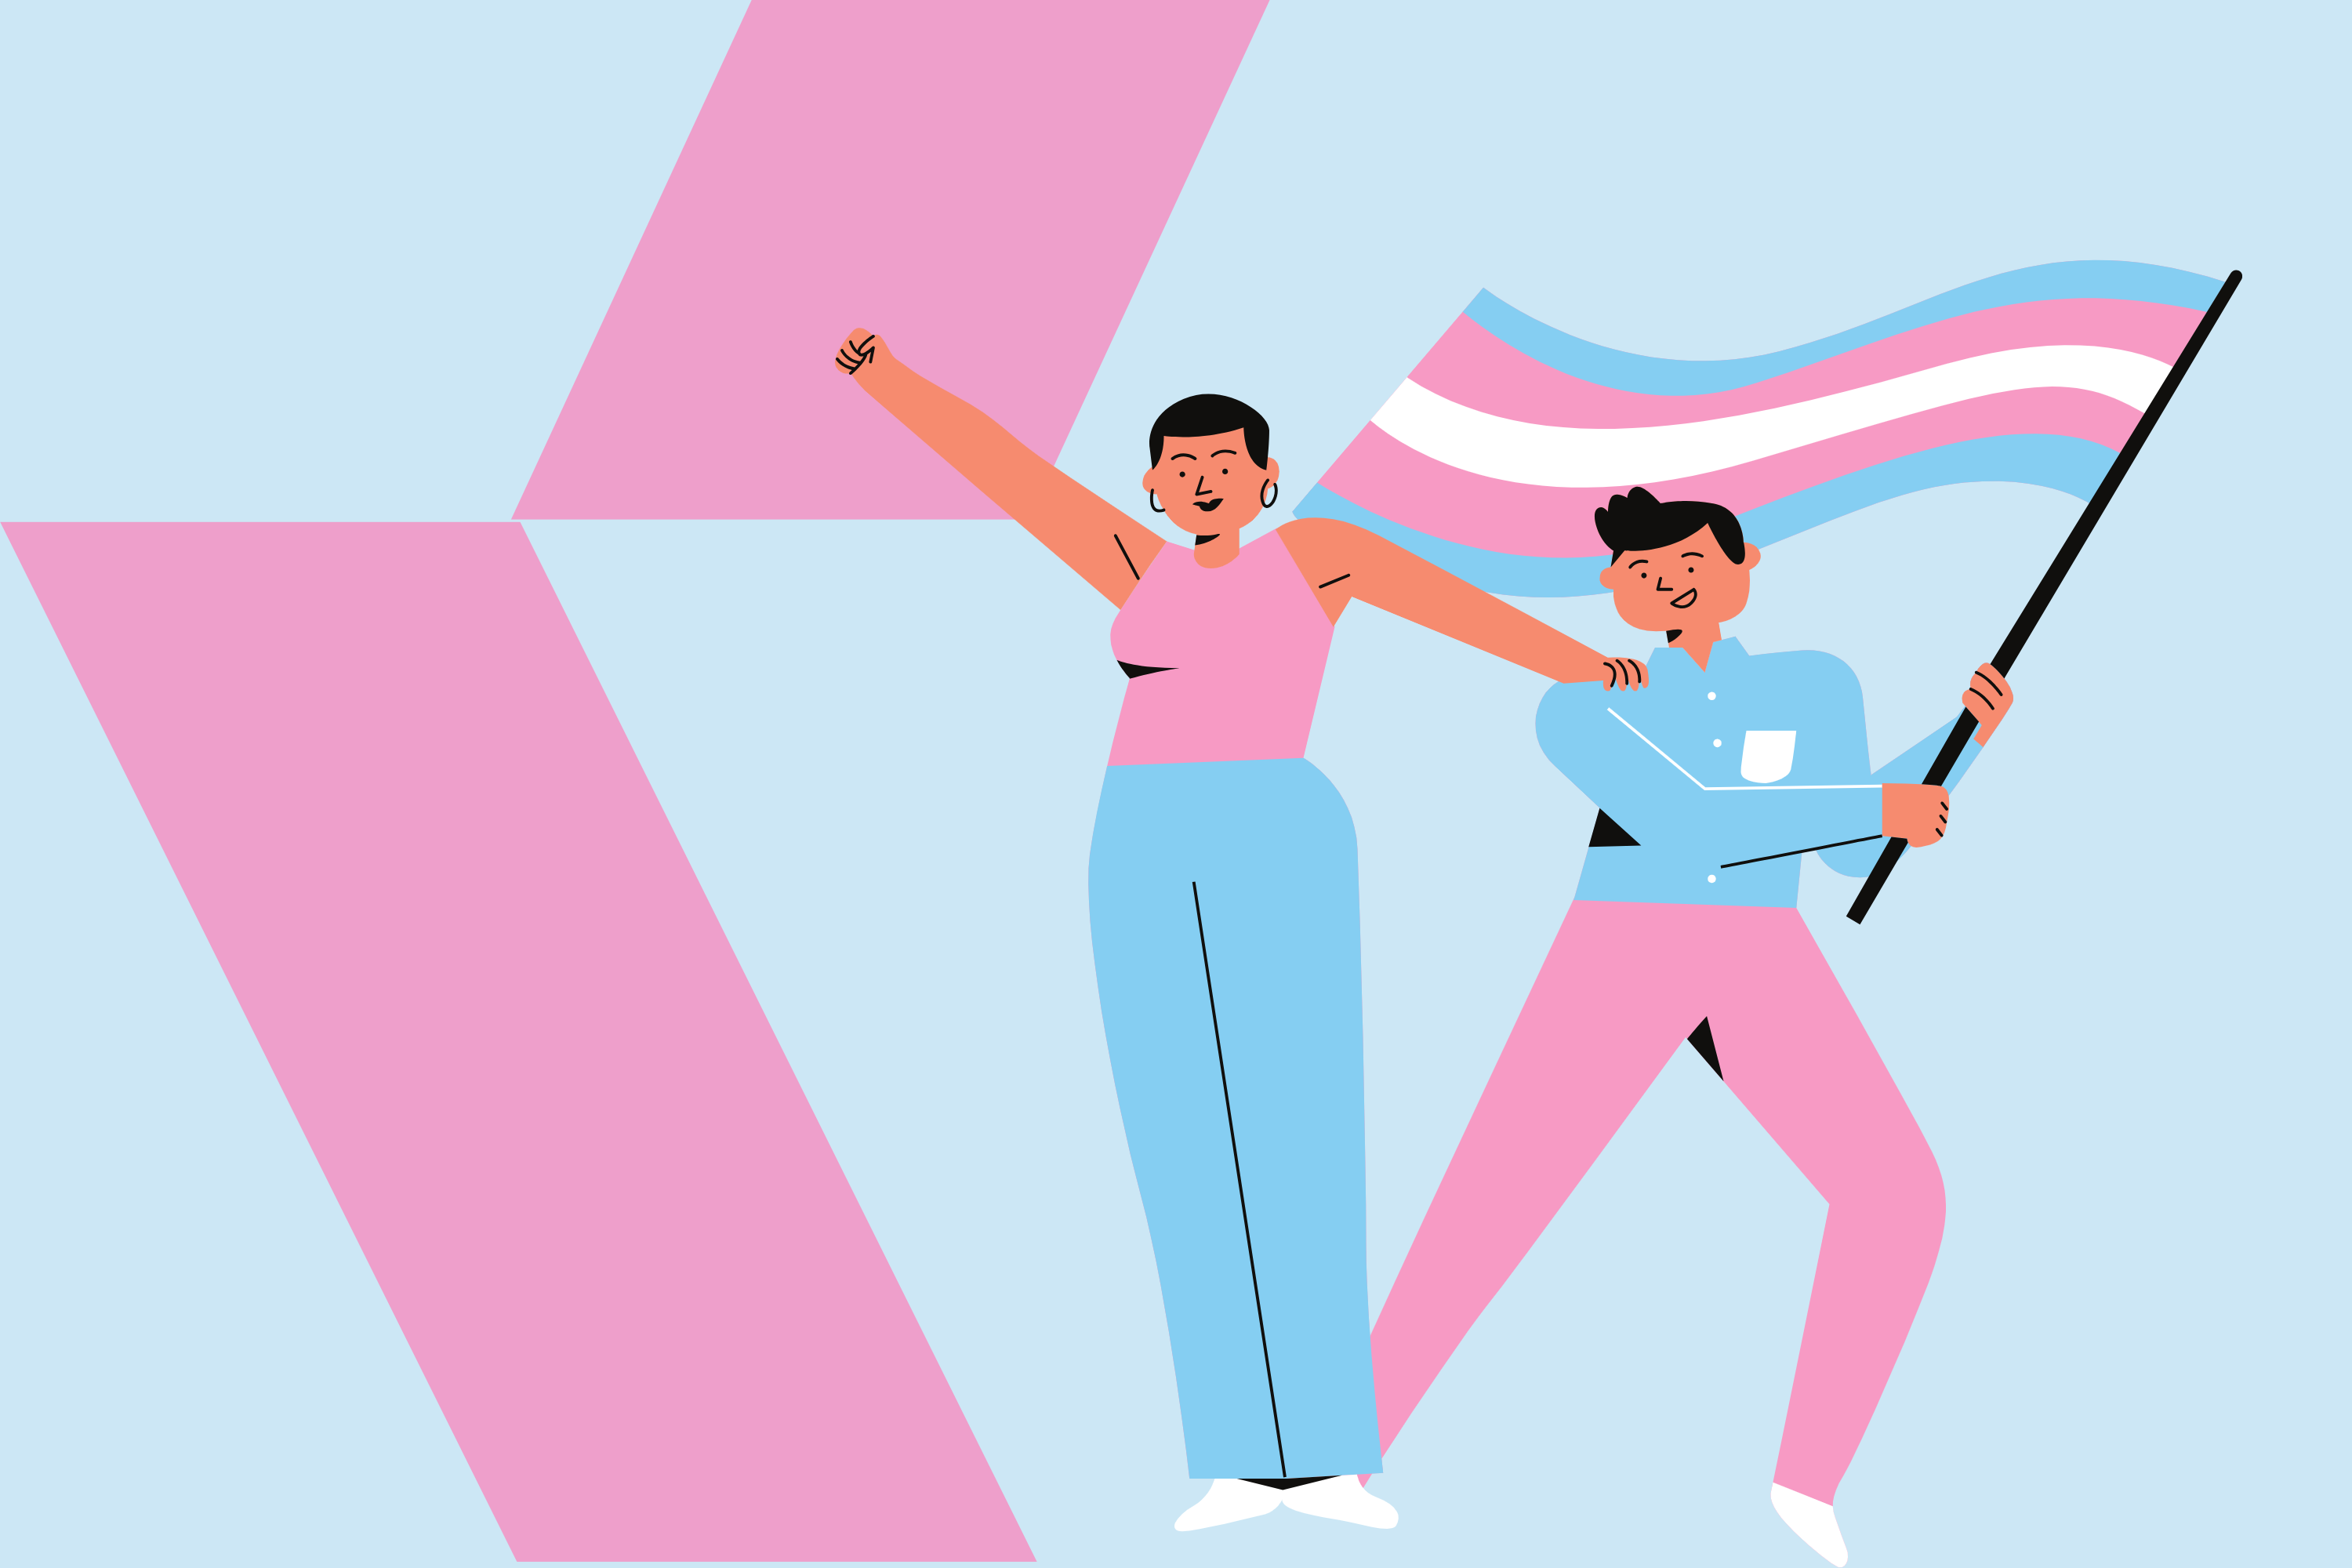 blue backg cartoon people wearing pink and blue clothes and flying a trans flag